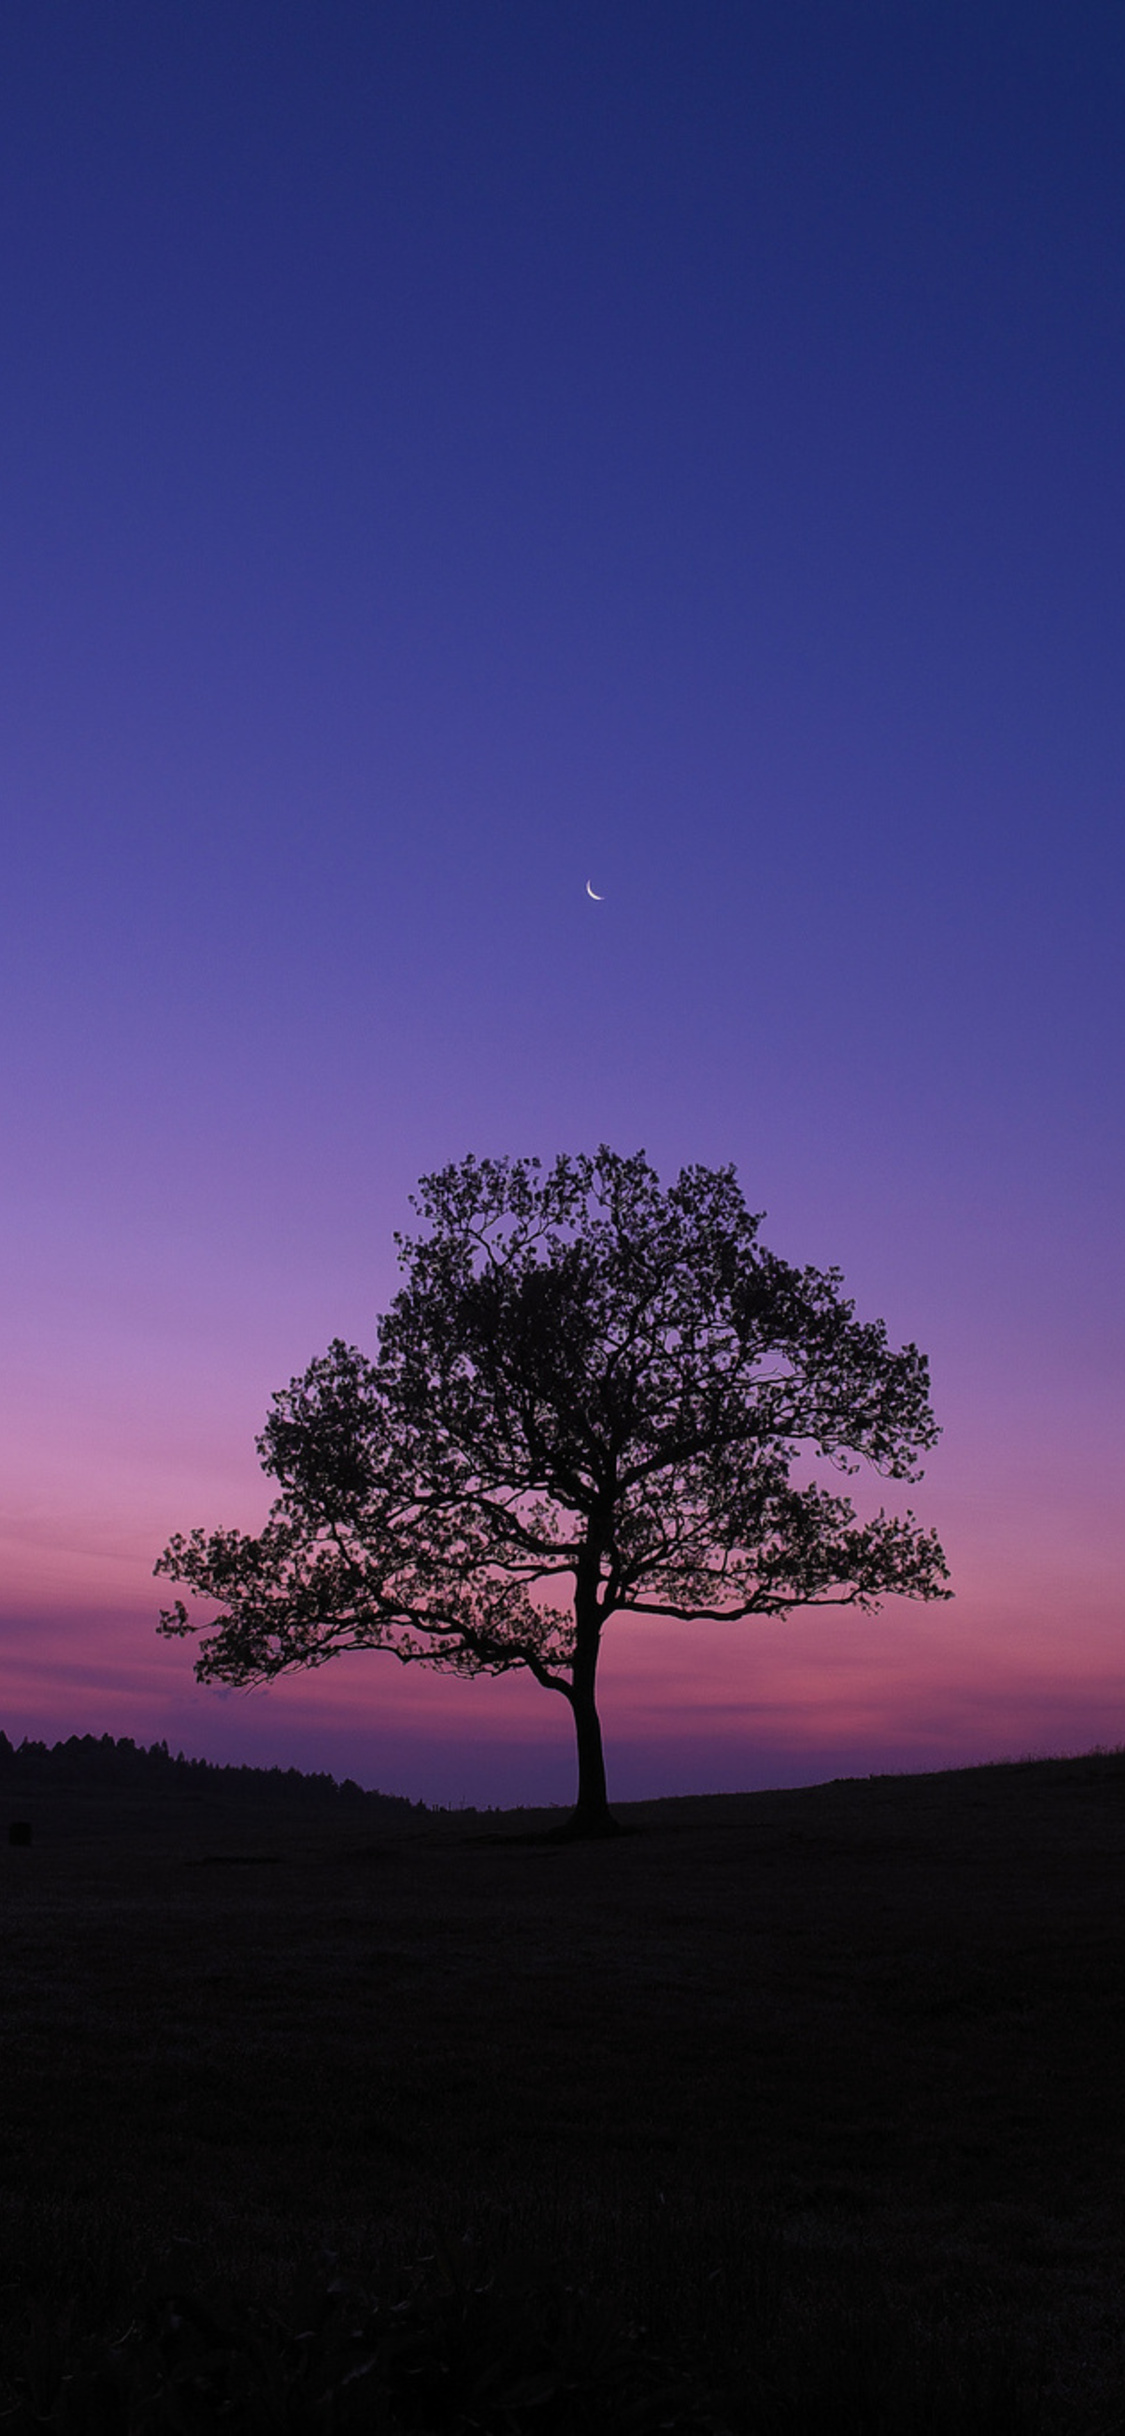 X dark sky tree purple sky nature iphone xsiphone iphone x hd k wallpapers images backgrounds photos and pictures